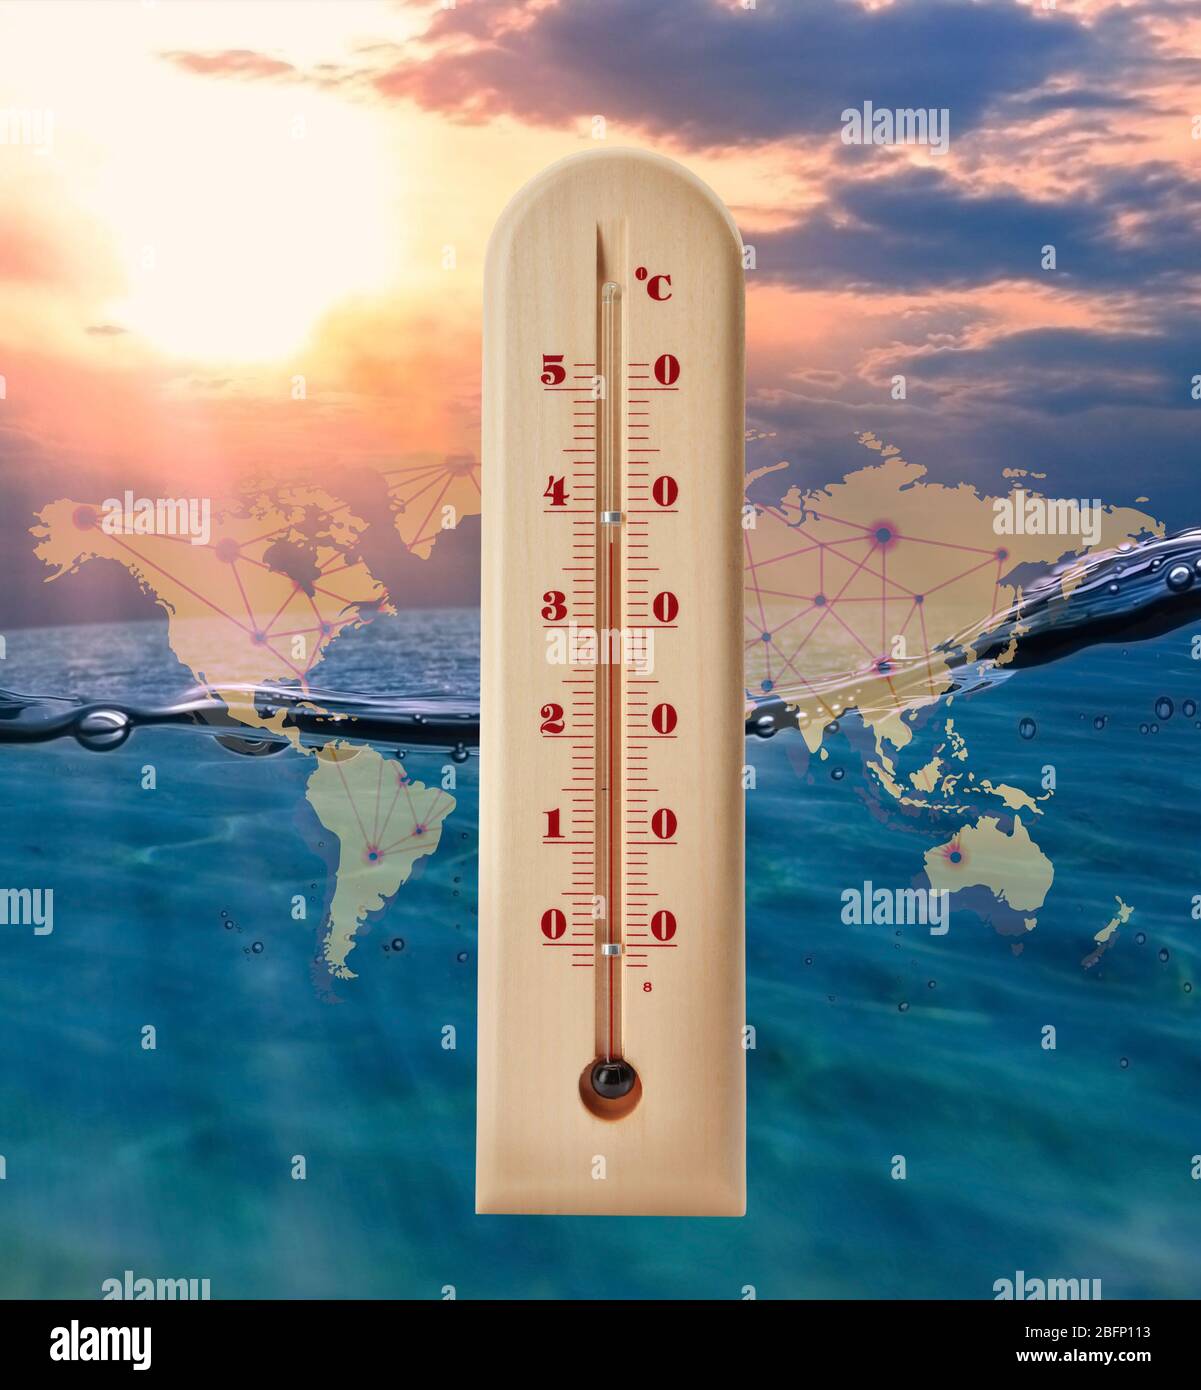 World map with thermometer showing high temperature and seascape